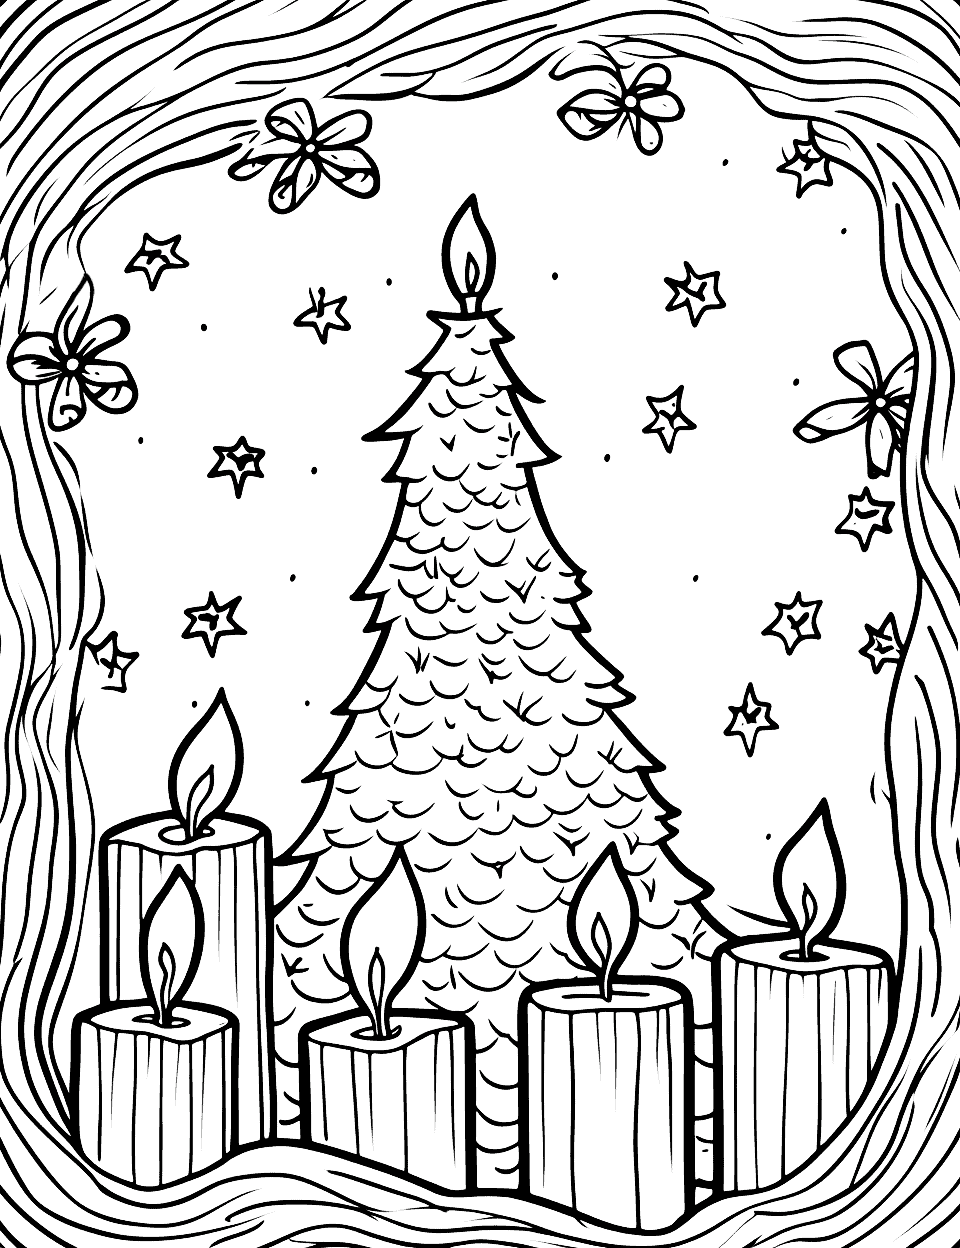 Christmas Candlelight Coloring Page - A peaceful scene illuminated by the warm glow of Christmas candles.